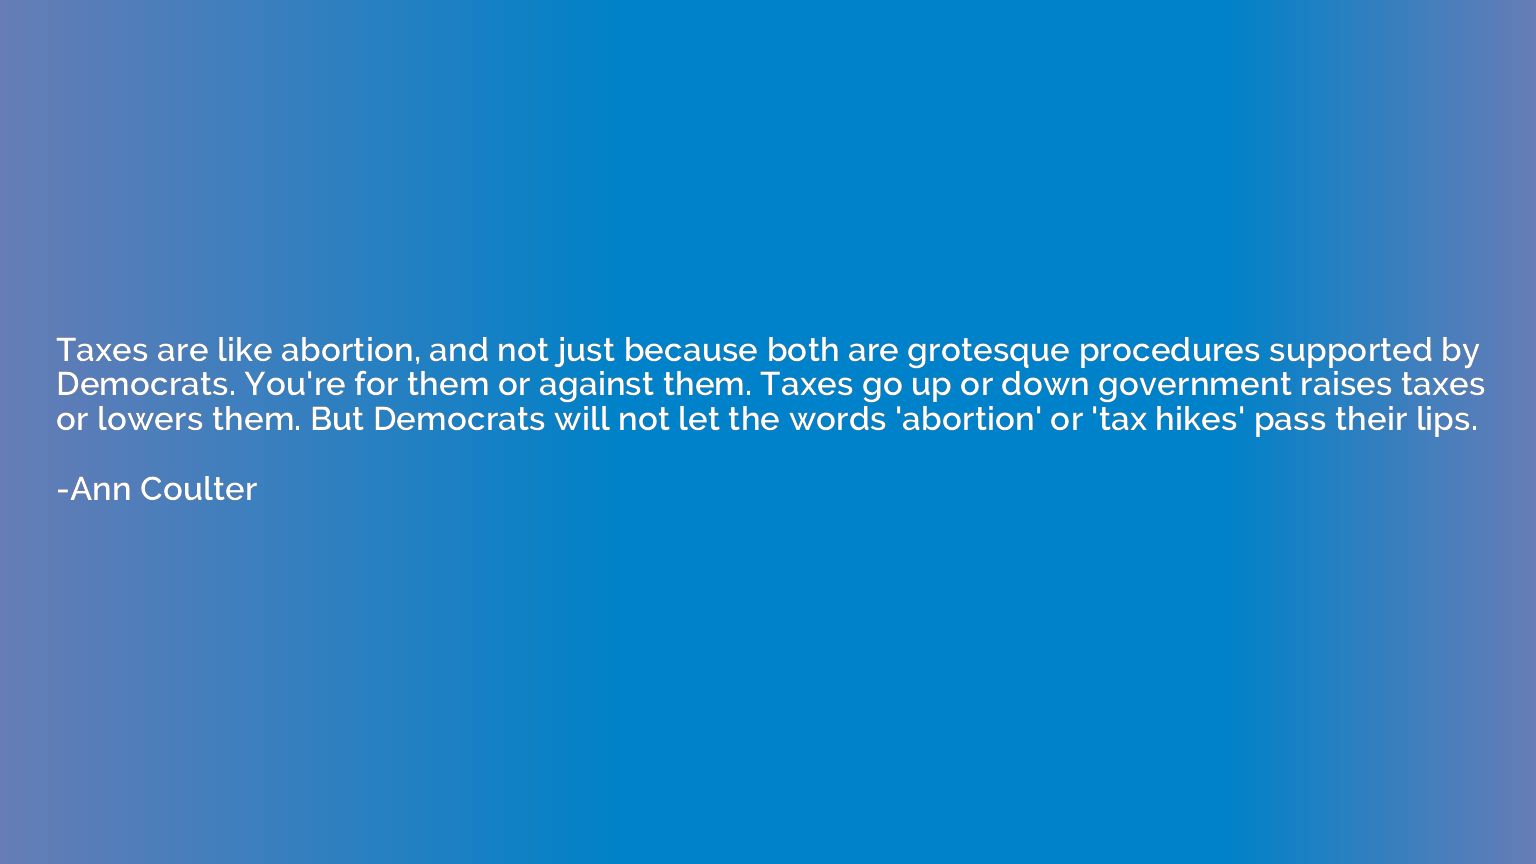 Taxes are like abortion, and not just because both are grote